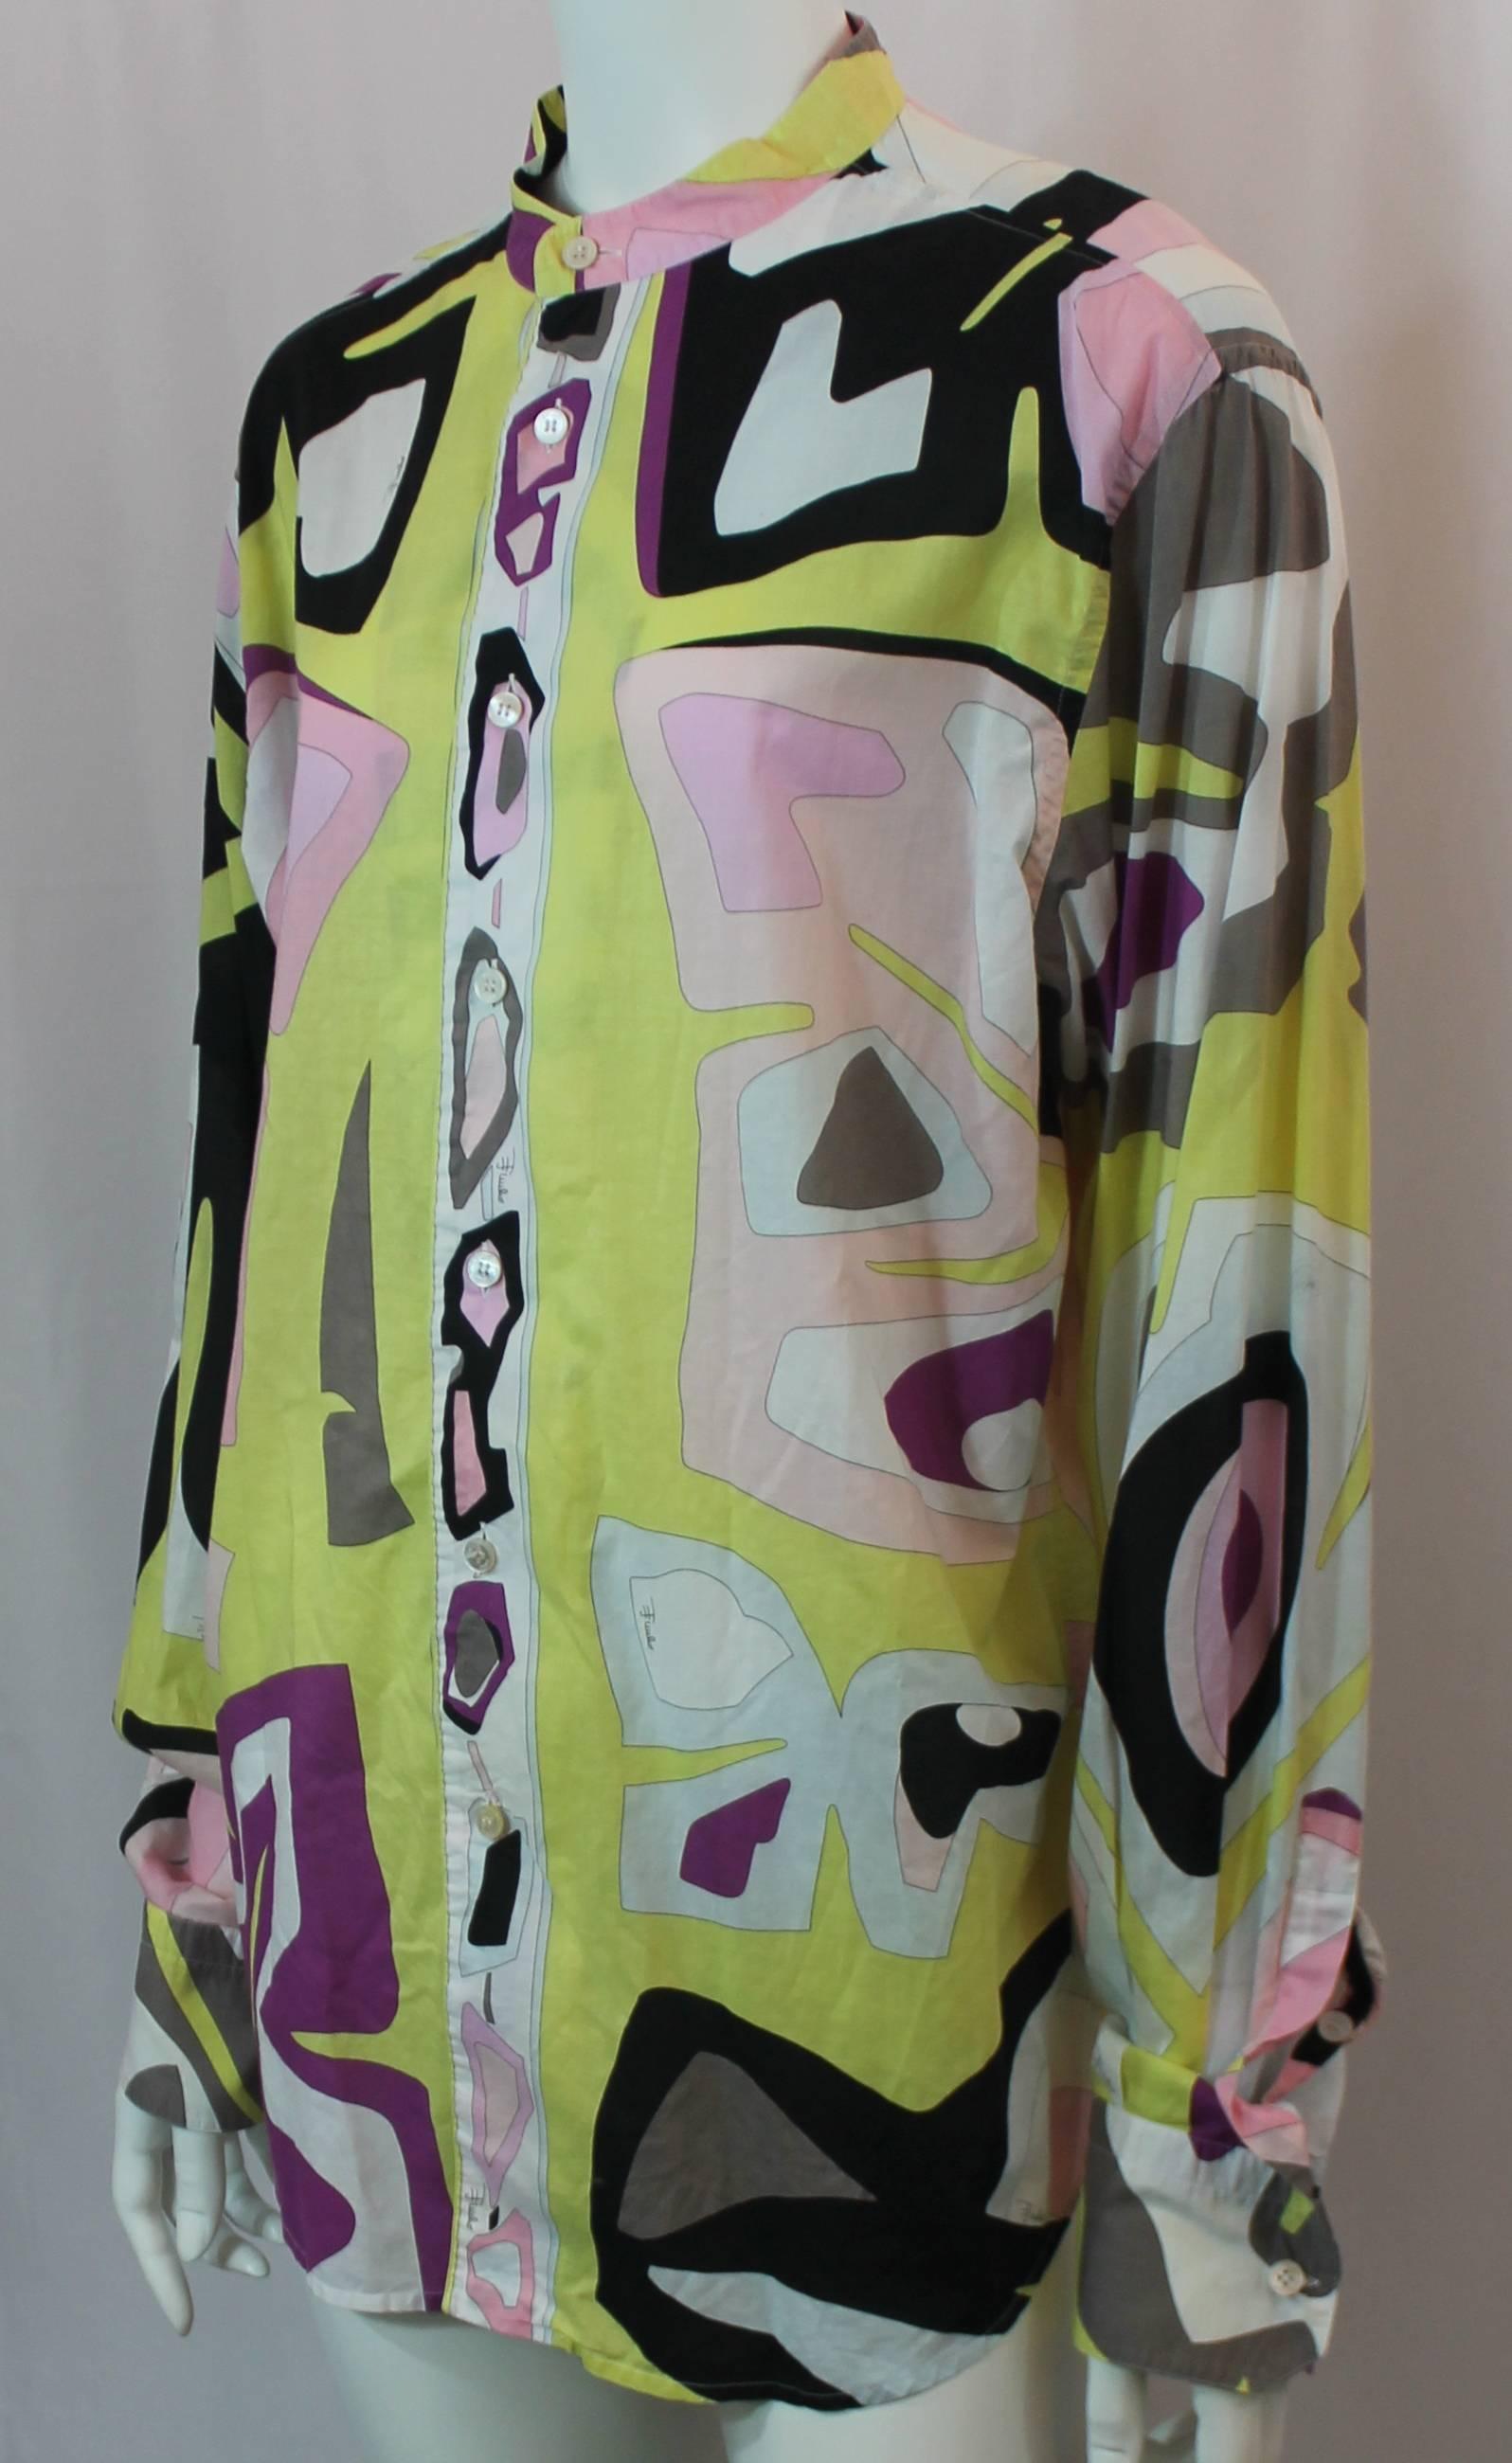 Pucci Multi-Colored Printed Cotton Long Sleeve Round Neck Button Down - L. This loose top is a button up and features a purple, pink, black, and yellow geometric print. It is in excellent condition with very light wear.

Measurements:
Bust: